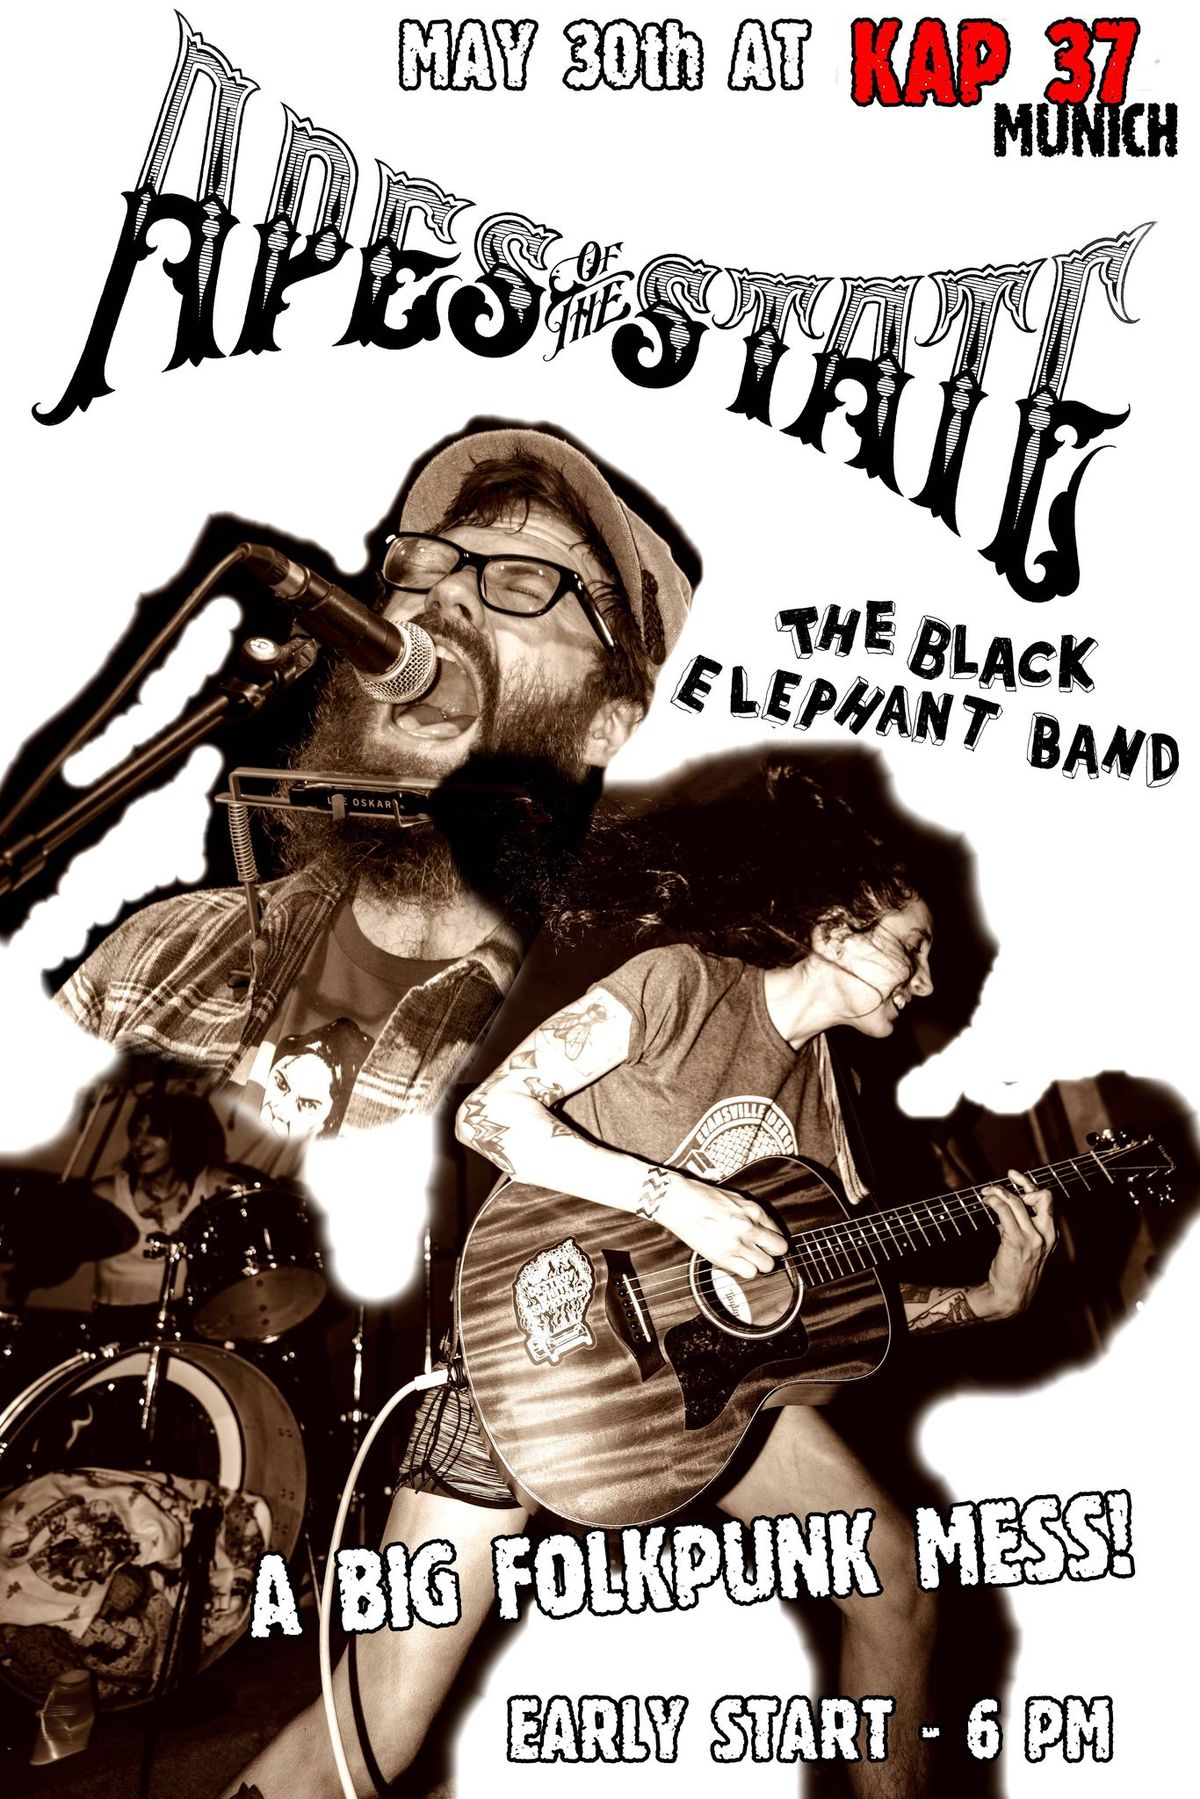 Apes Of The State + The Black Elephant Band